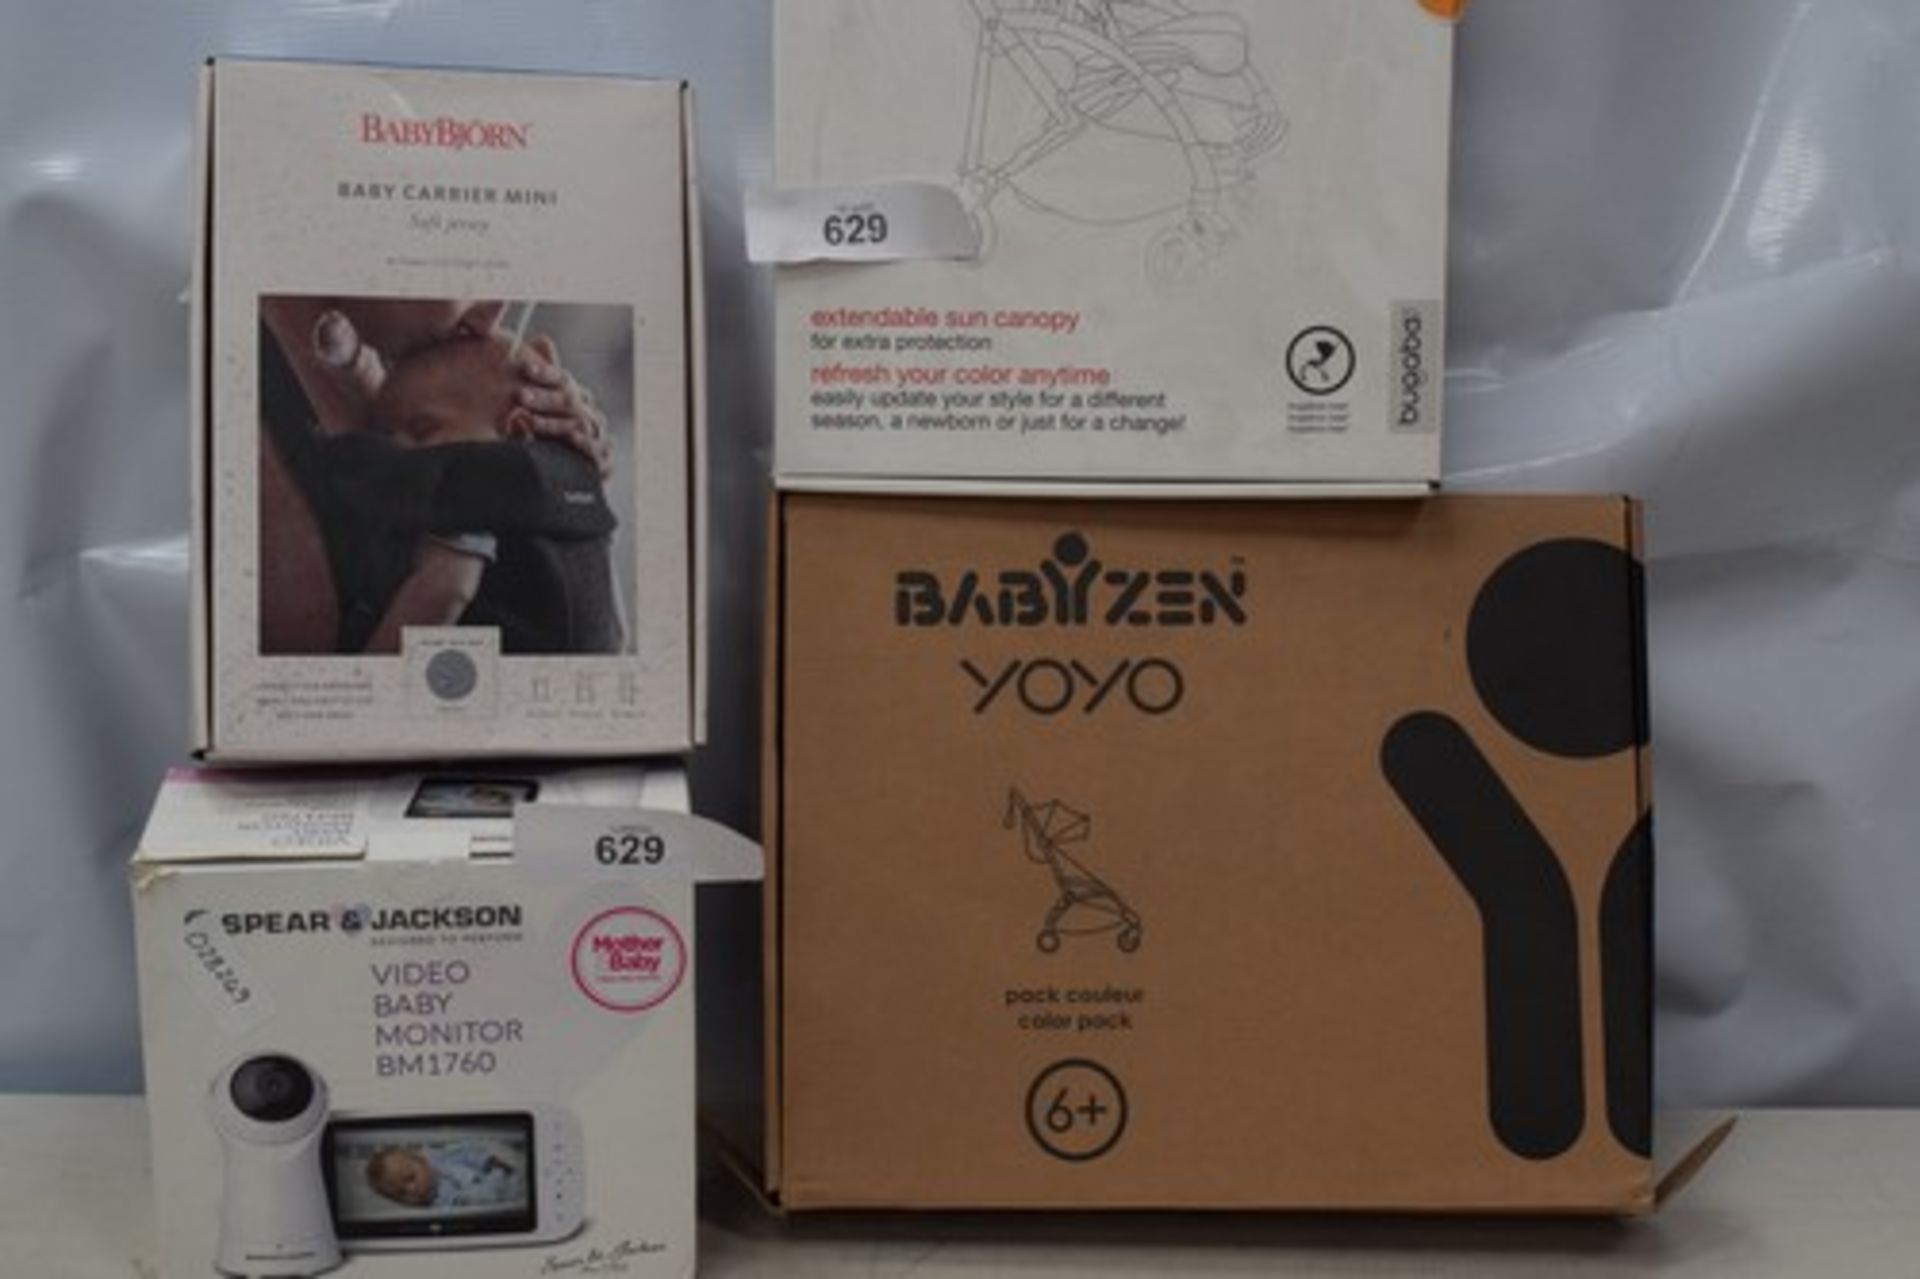 1 x Spear and Jackson video baby monitor together with 1 x BabyBjorn baby carrier soft jersey